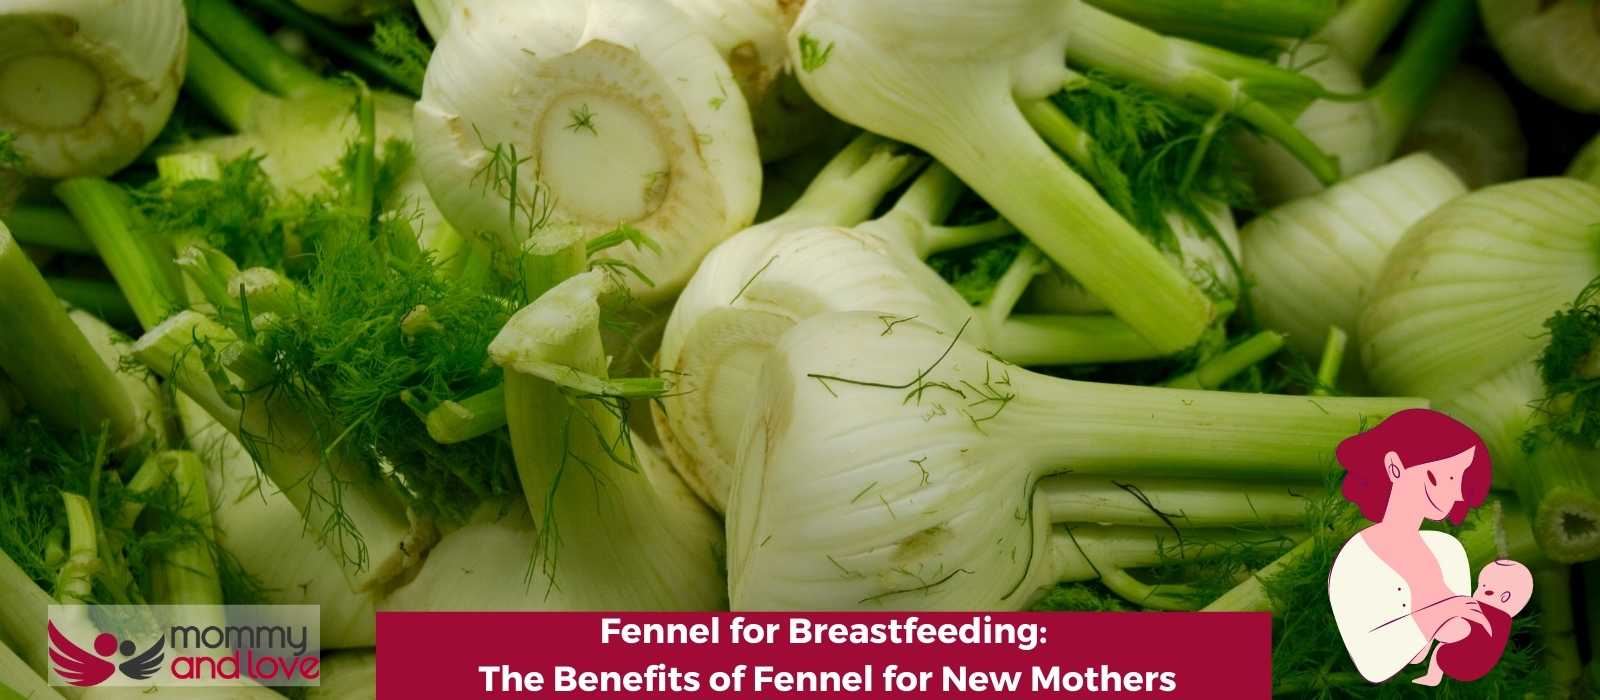 Fennel for Breastfeeding: The Benefits of Fennel for New Mothers